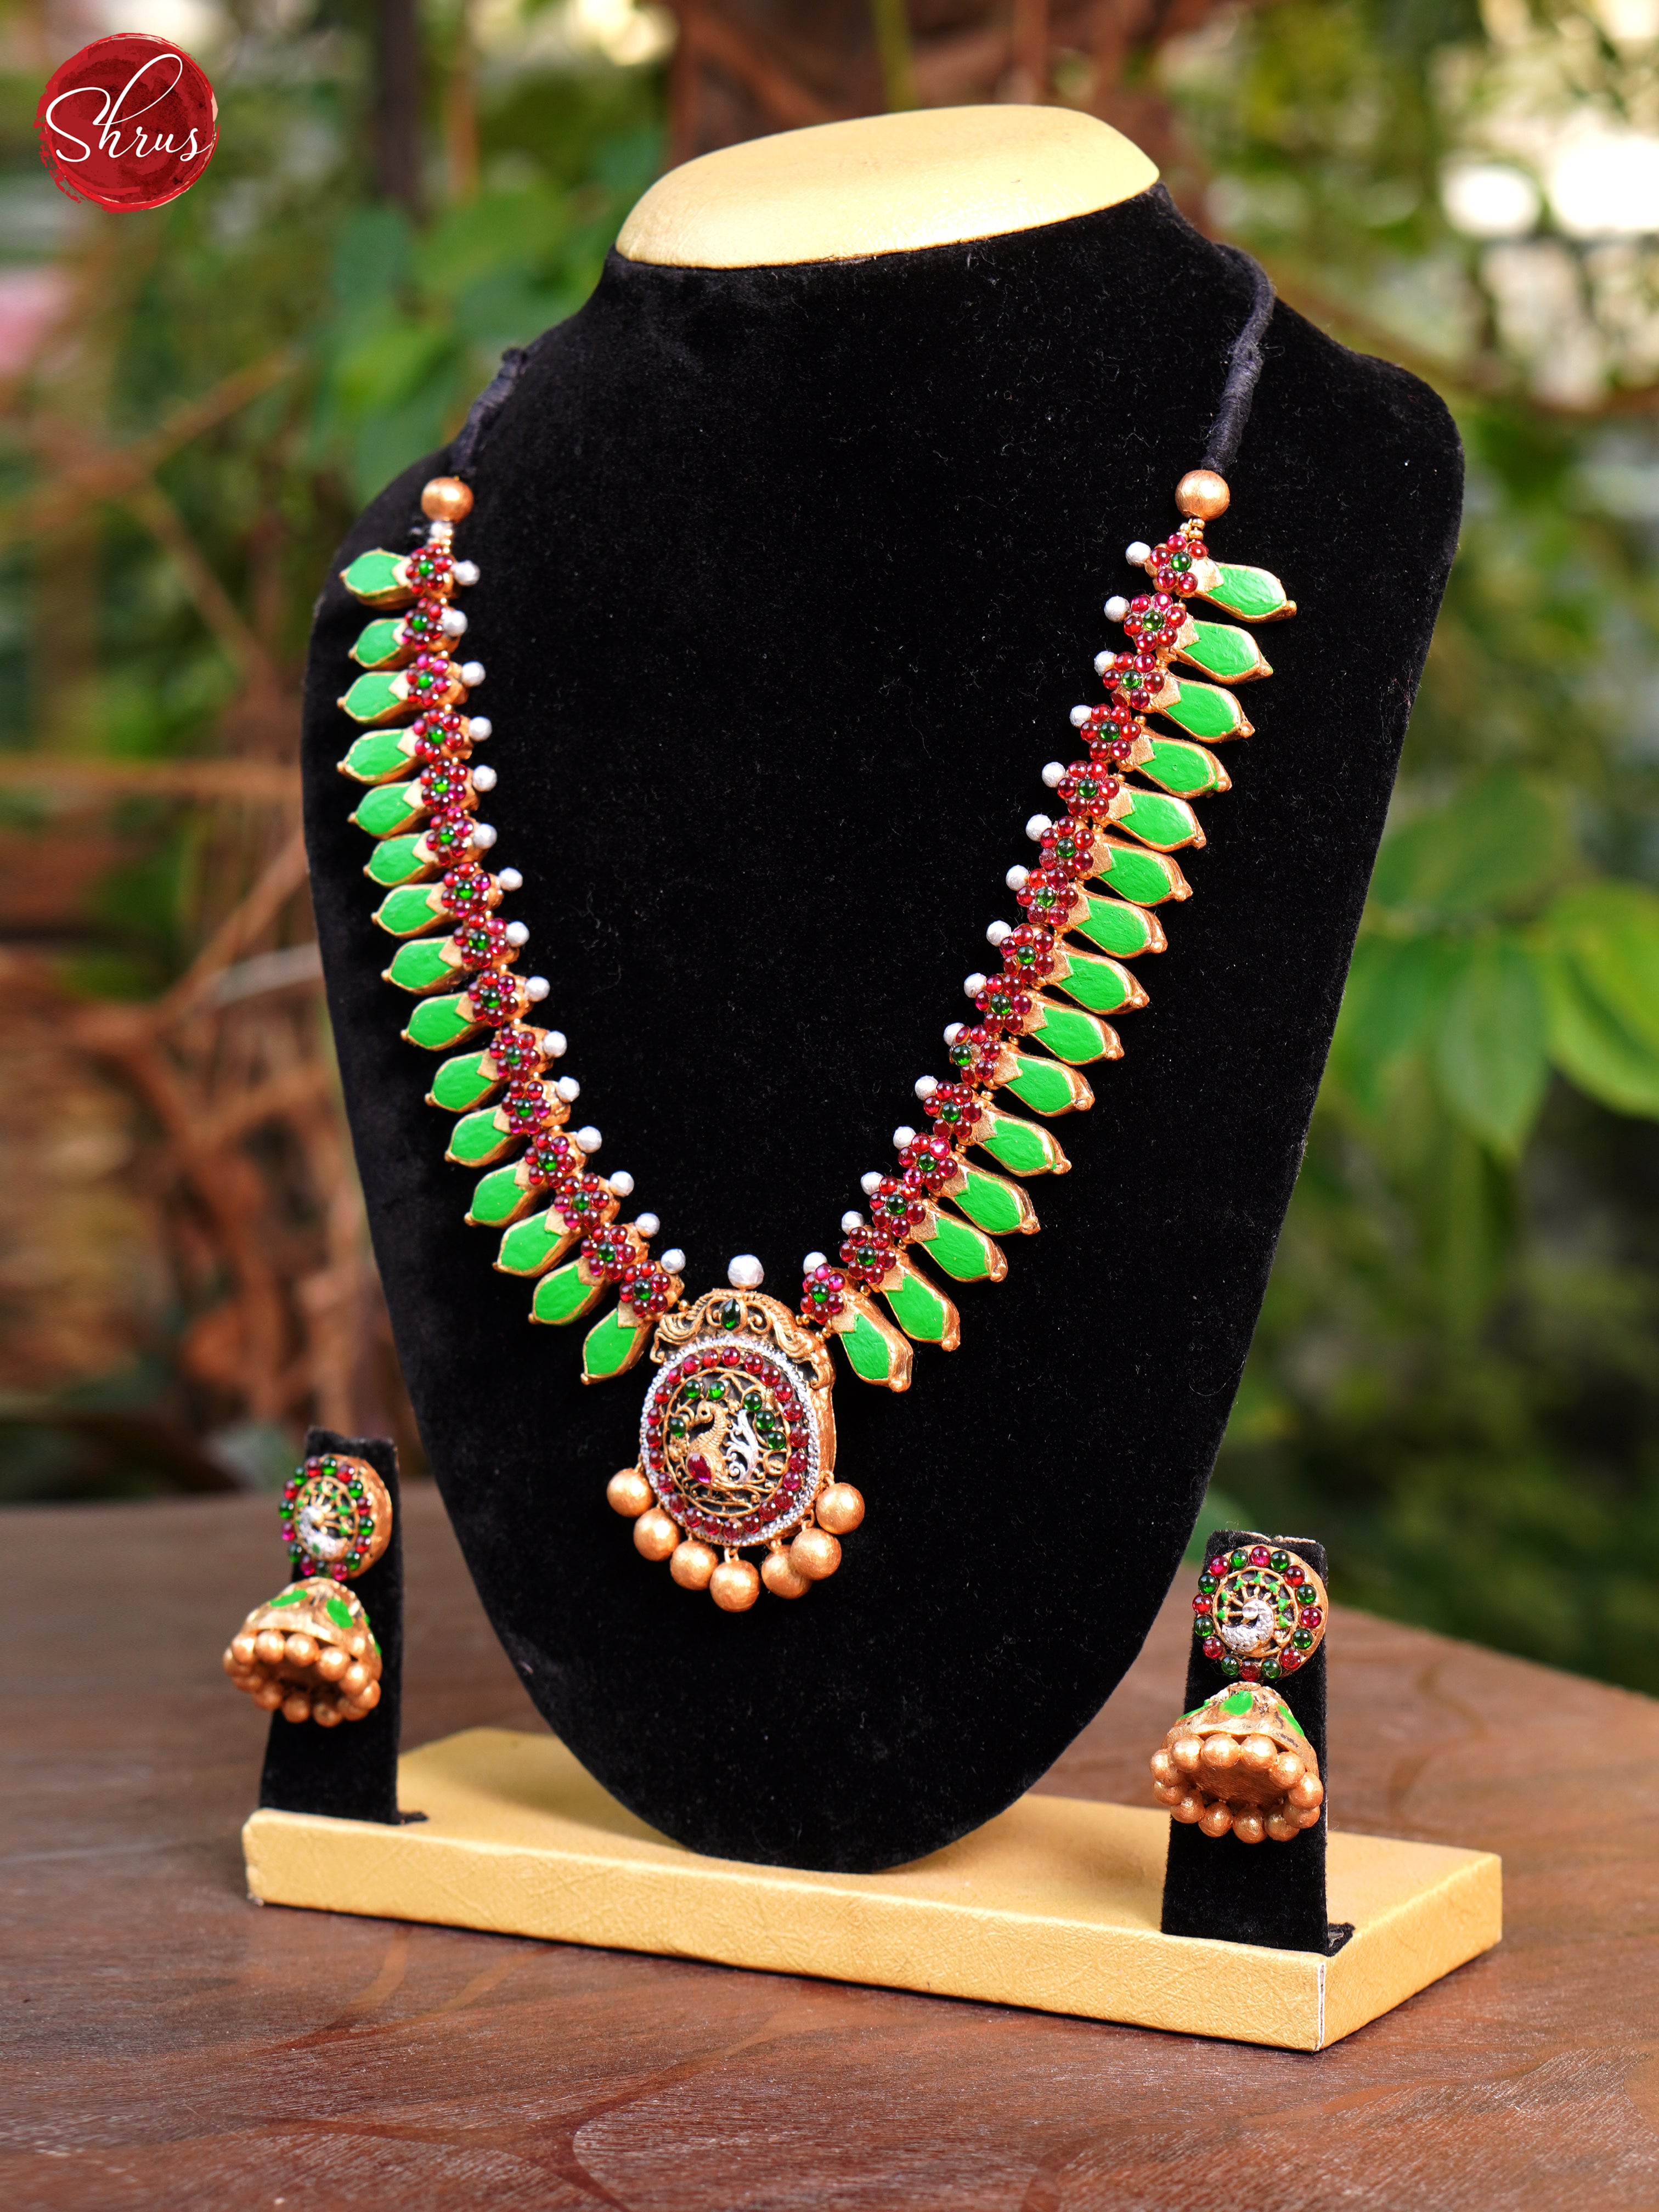 Handpainted TerraCotta Necklace with Jhumkas- Accessories - Shop on ShrusEternity.com